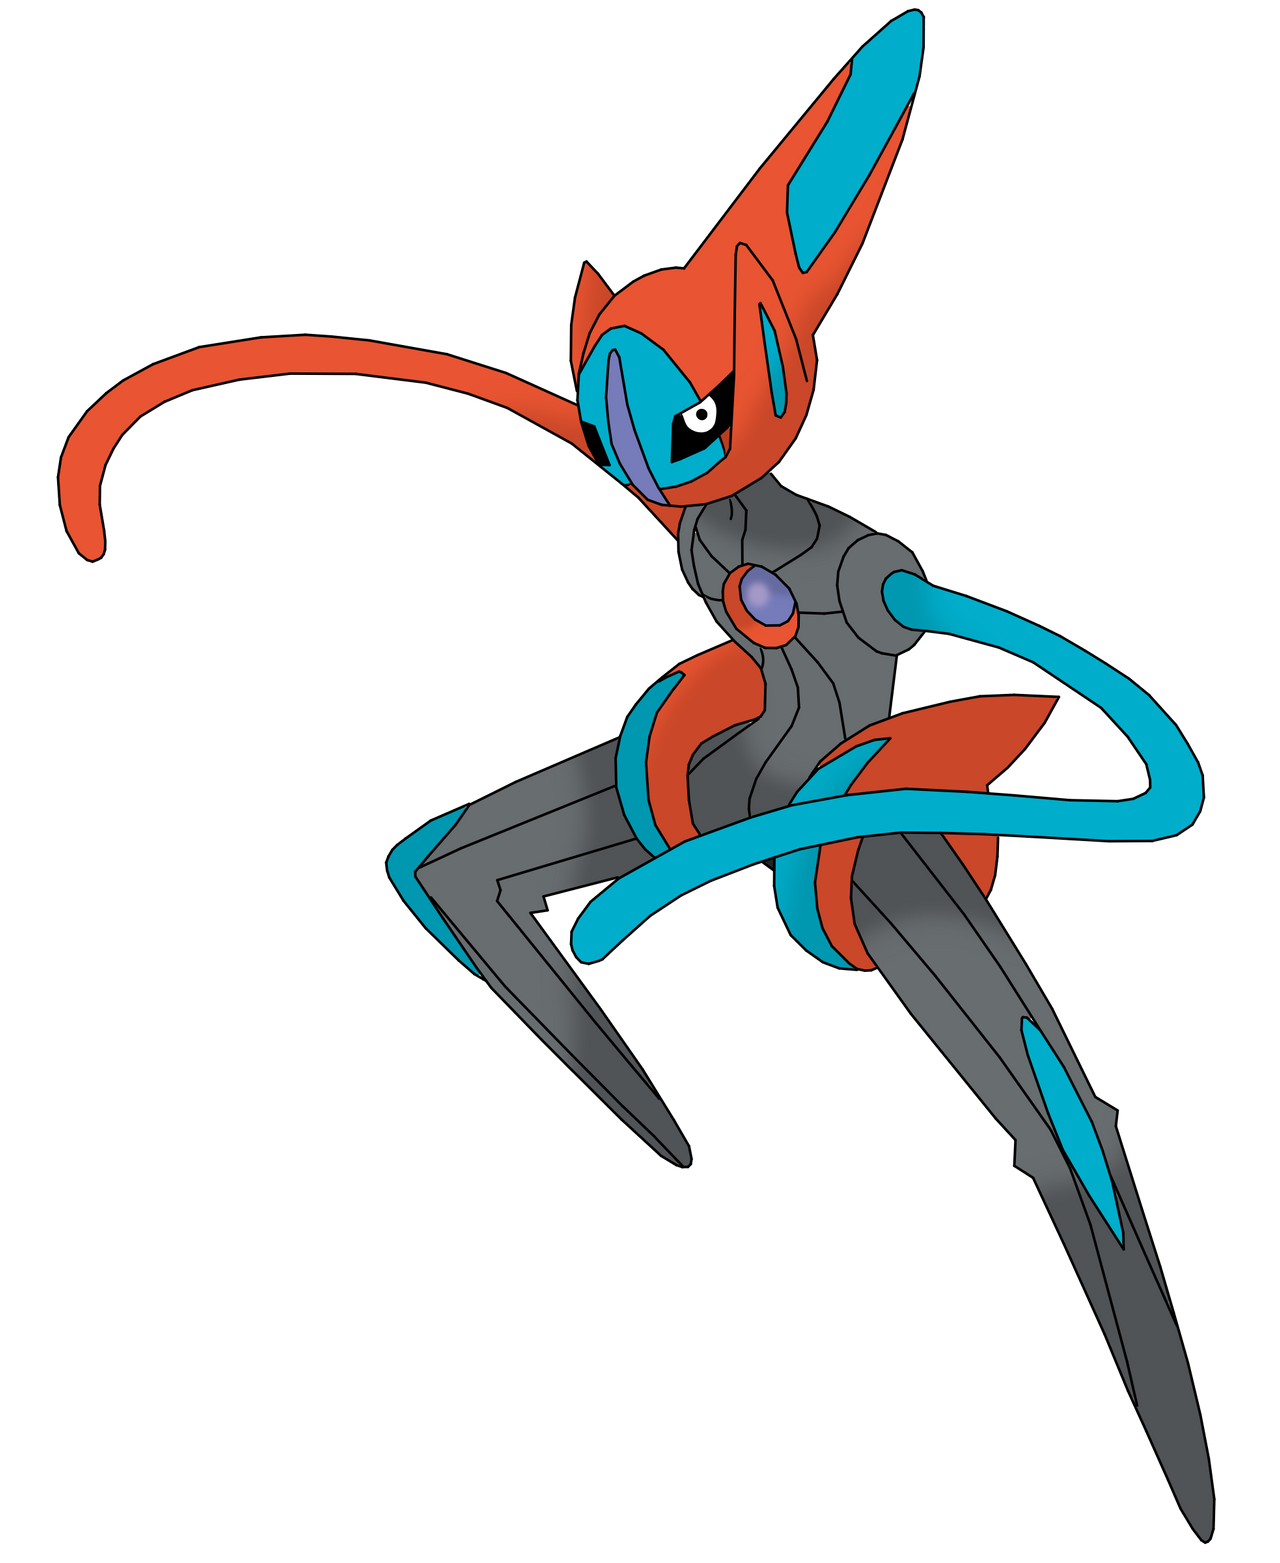 0386 Shiny Deoxys - Speed by ExoticPoke on DeviantArt